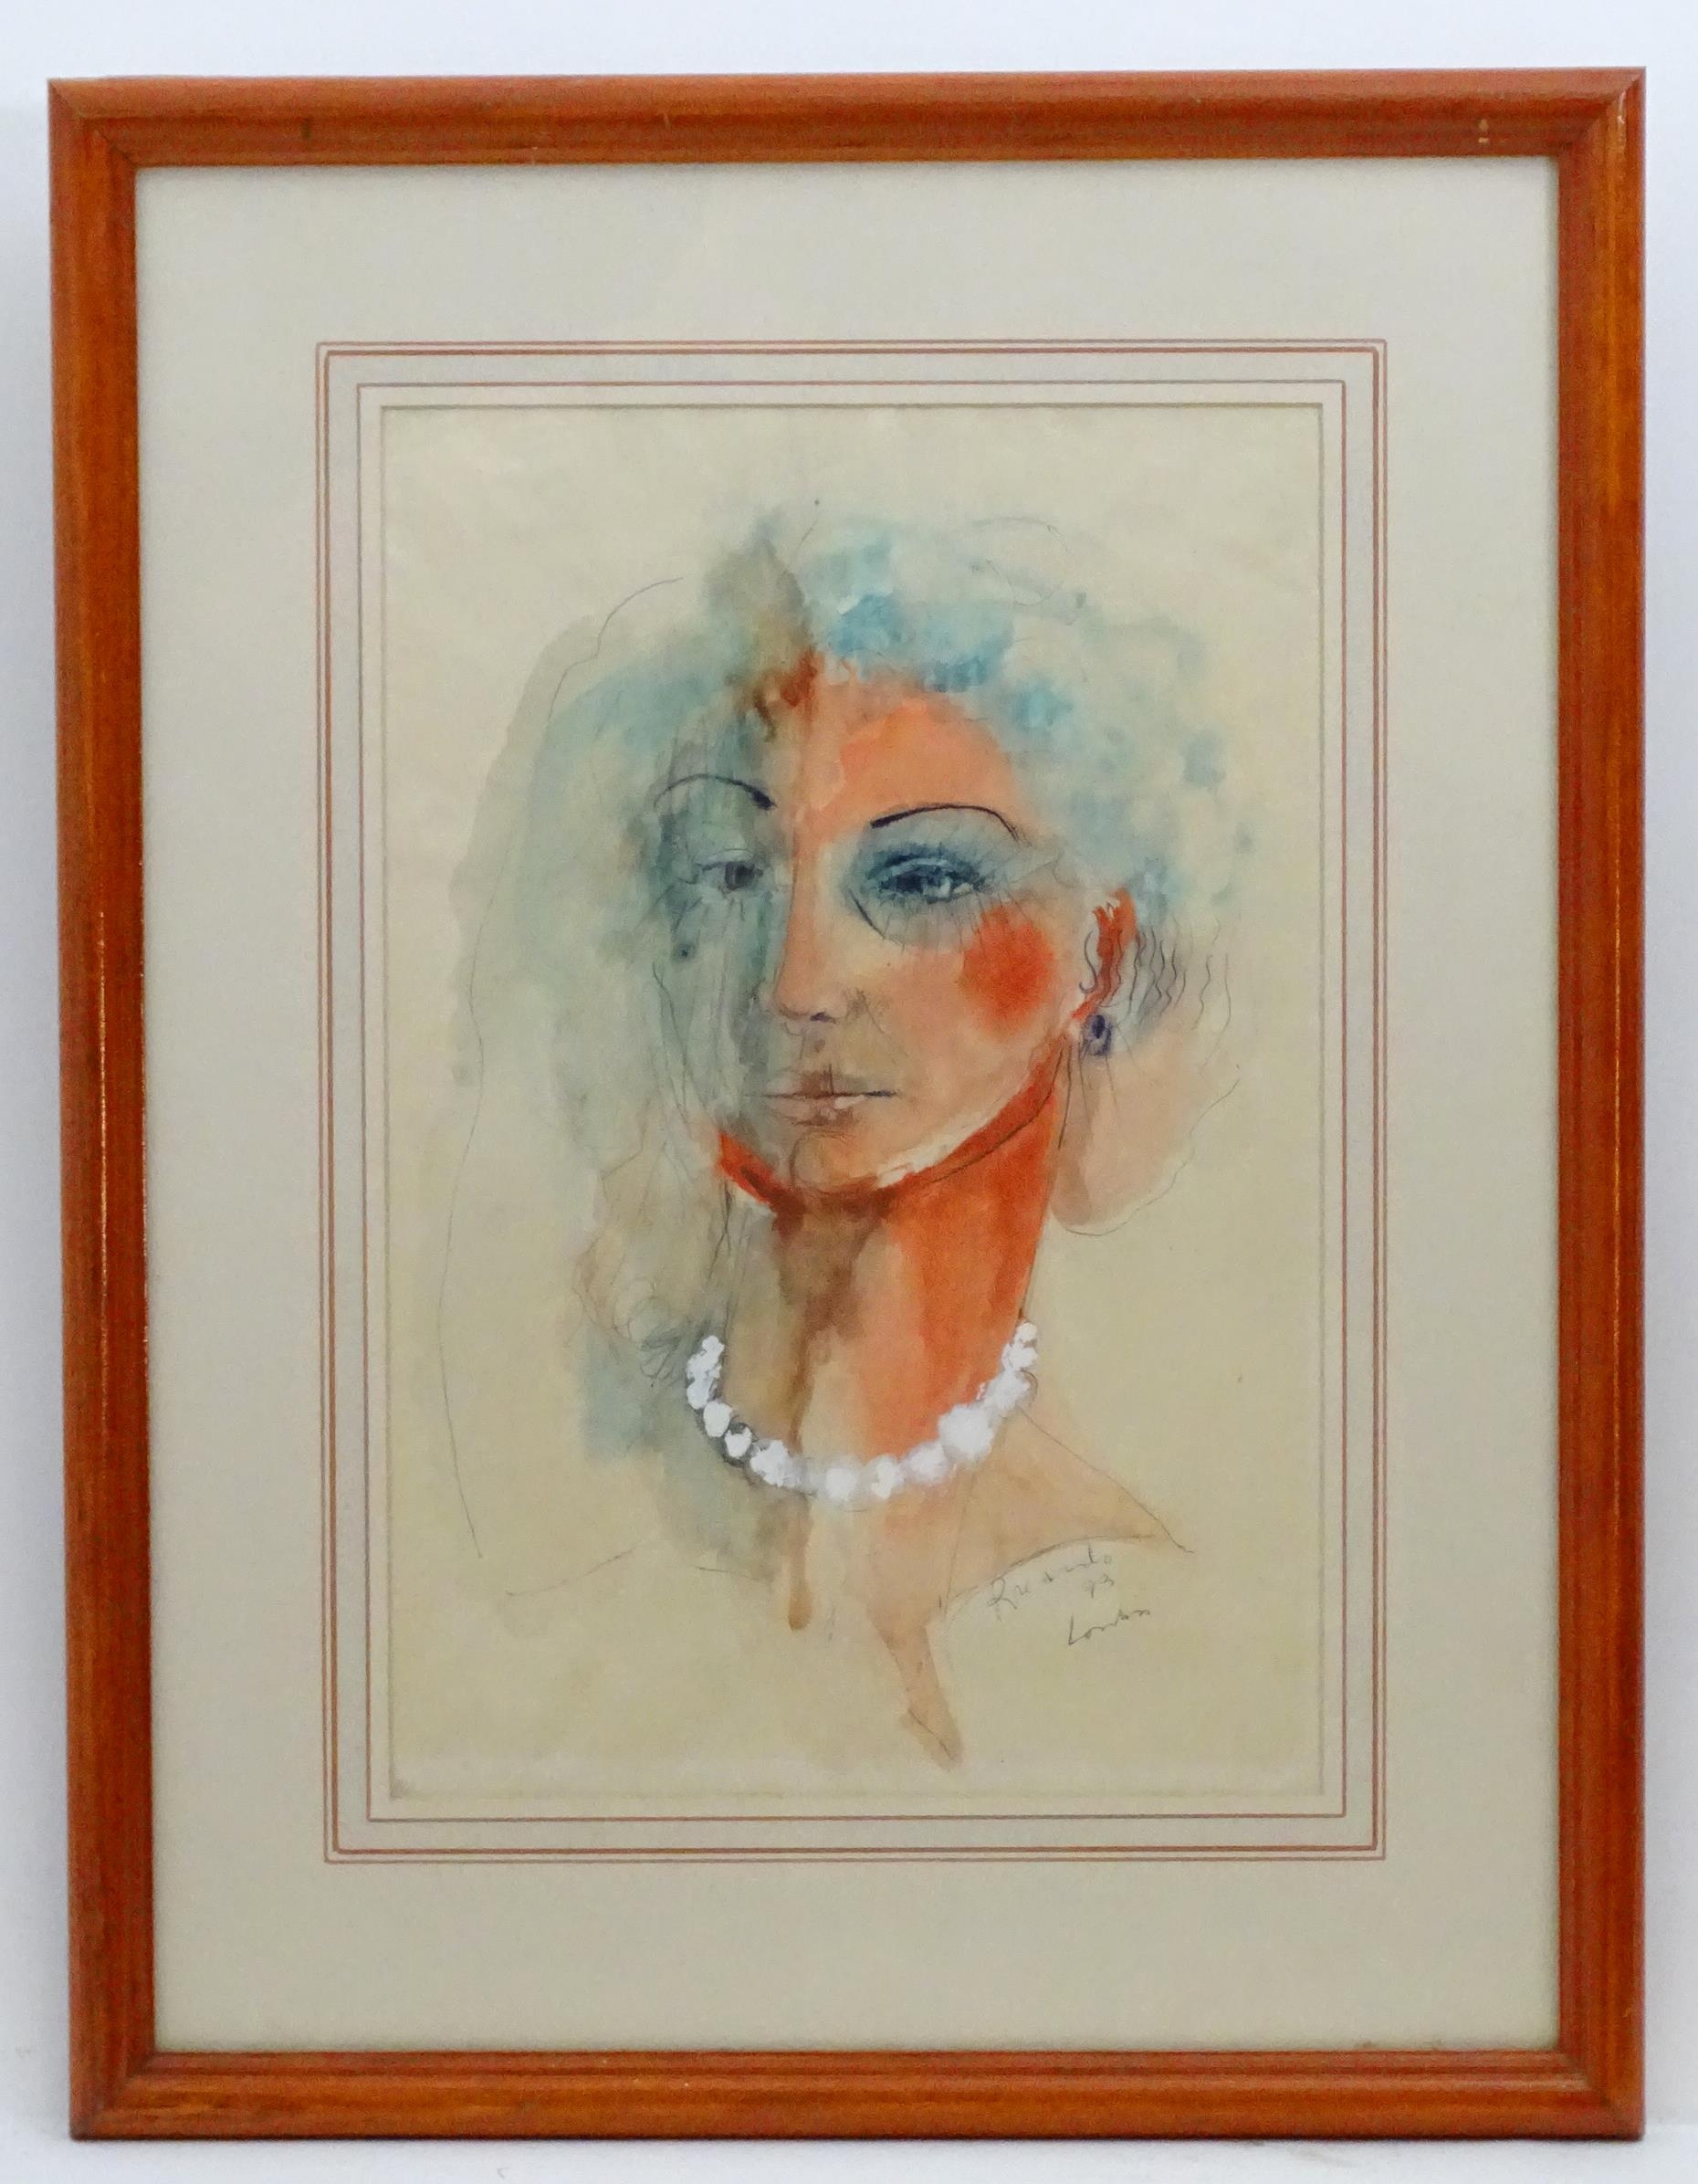 Ricardo, 20th century, Watercolour and ink, A portrait of a young woman with a bead necklace. Signed